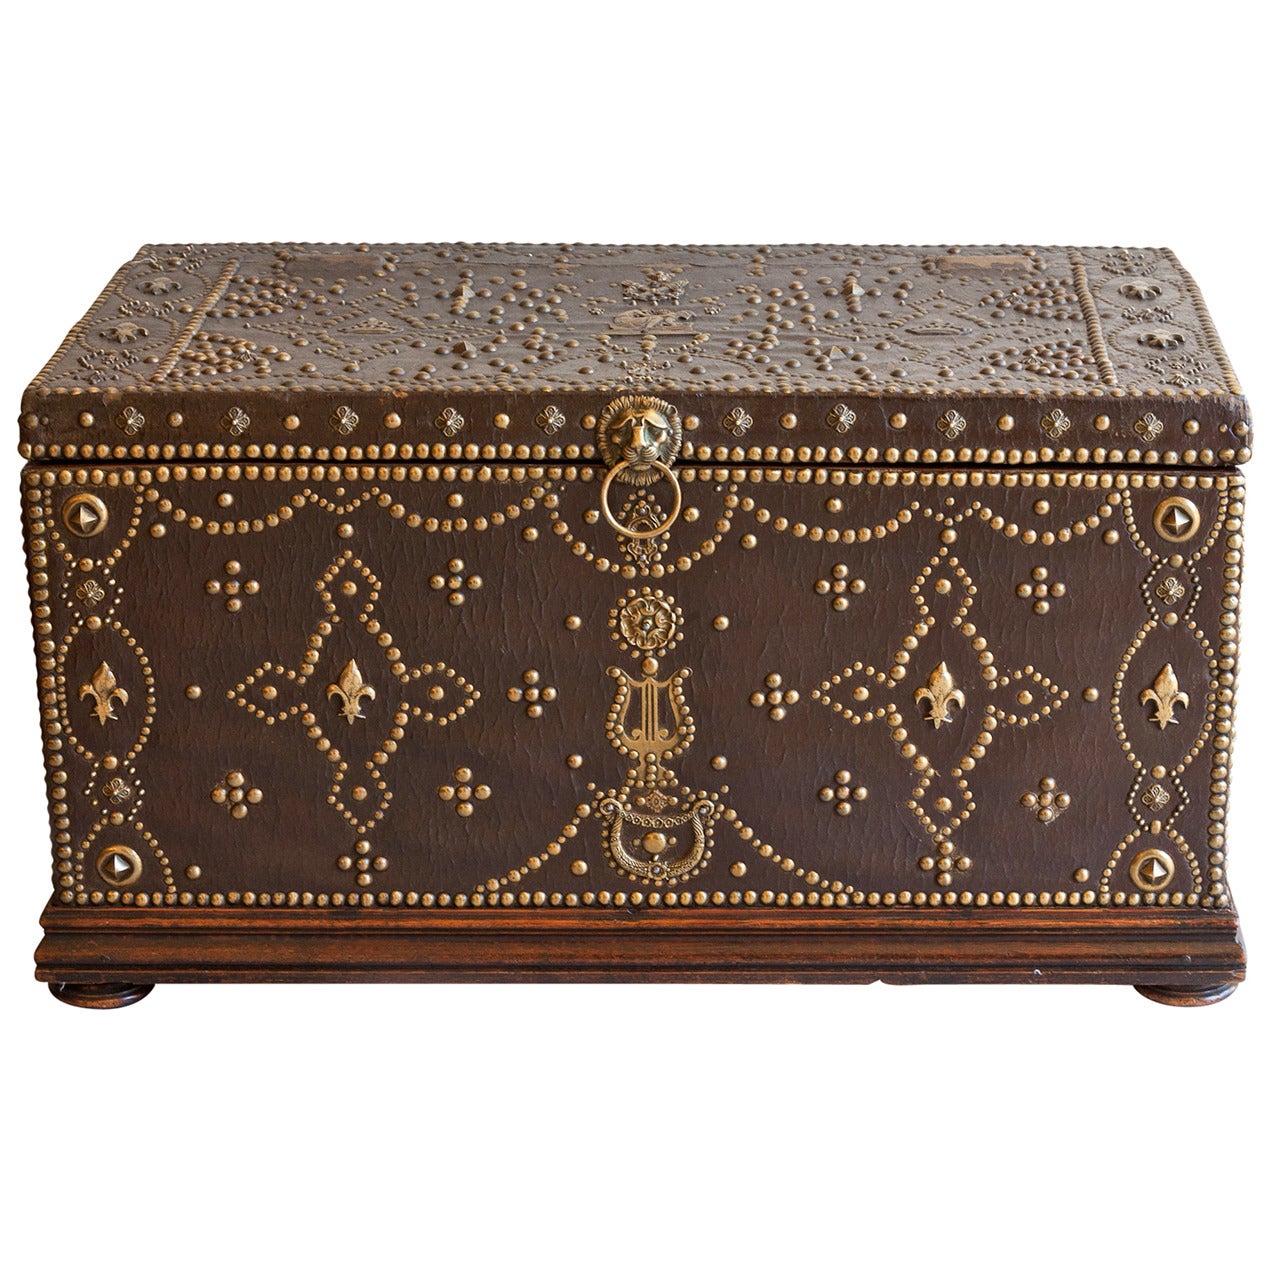 19th Century Leather Trunk with Brass Studs